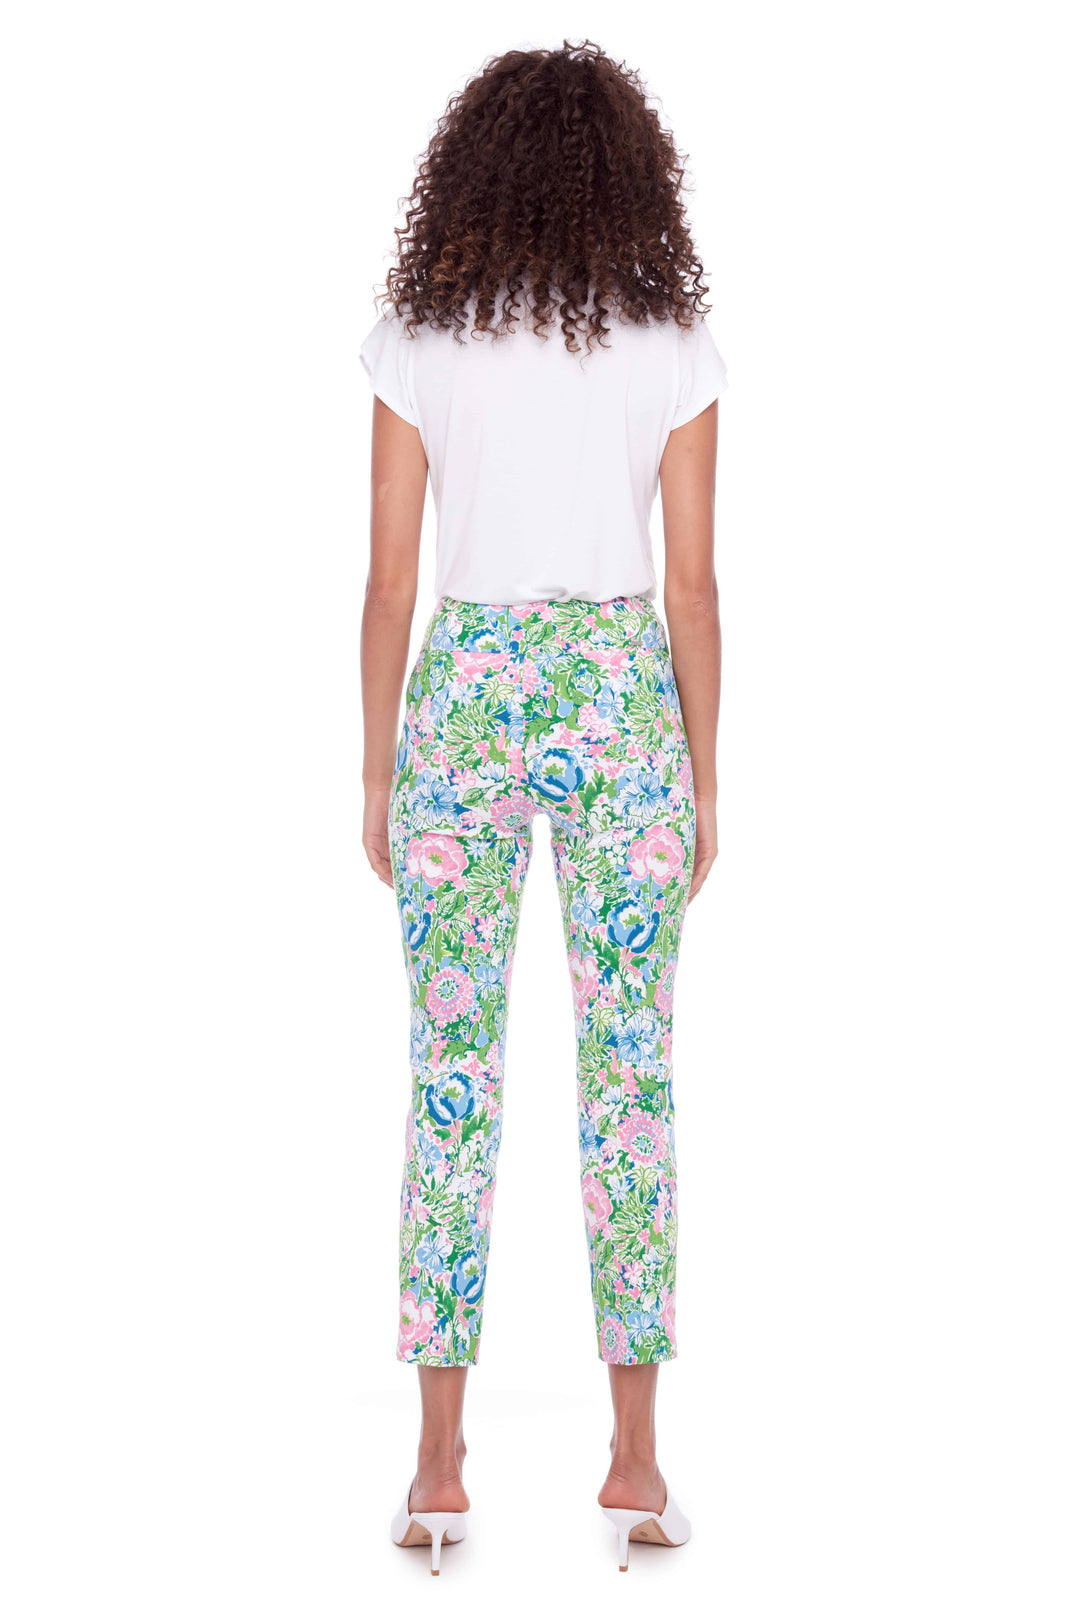 UP! Womens Pant 68111